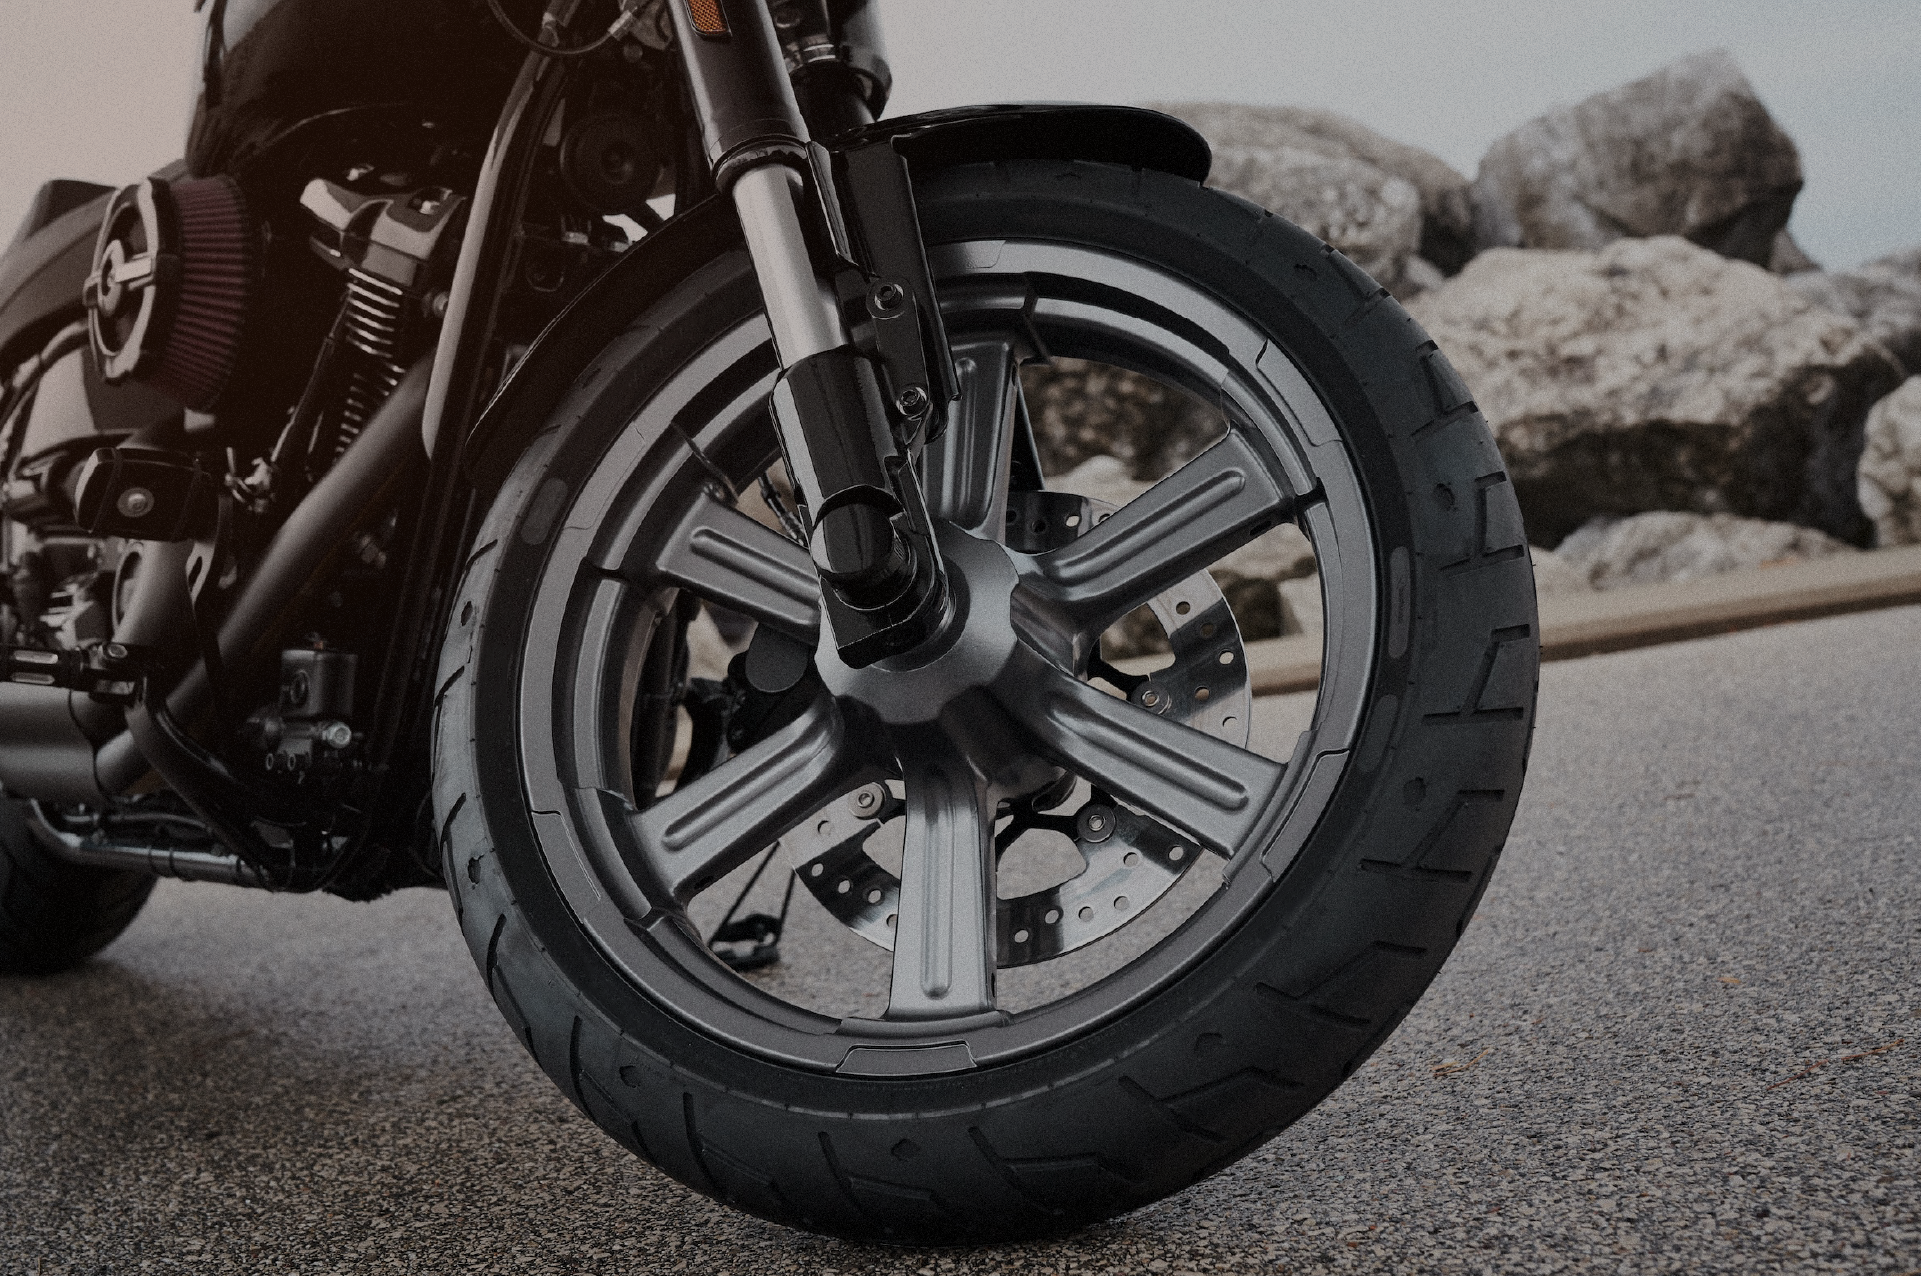 The LiveWire electric motorcycle wheel